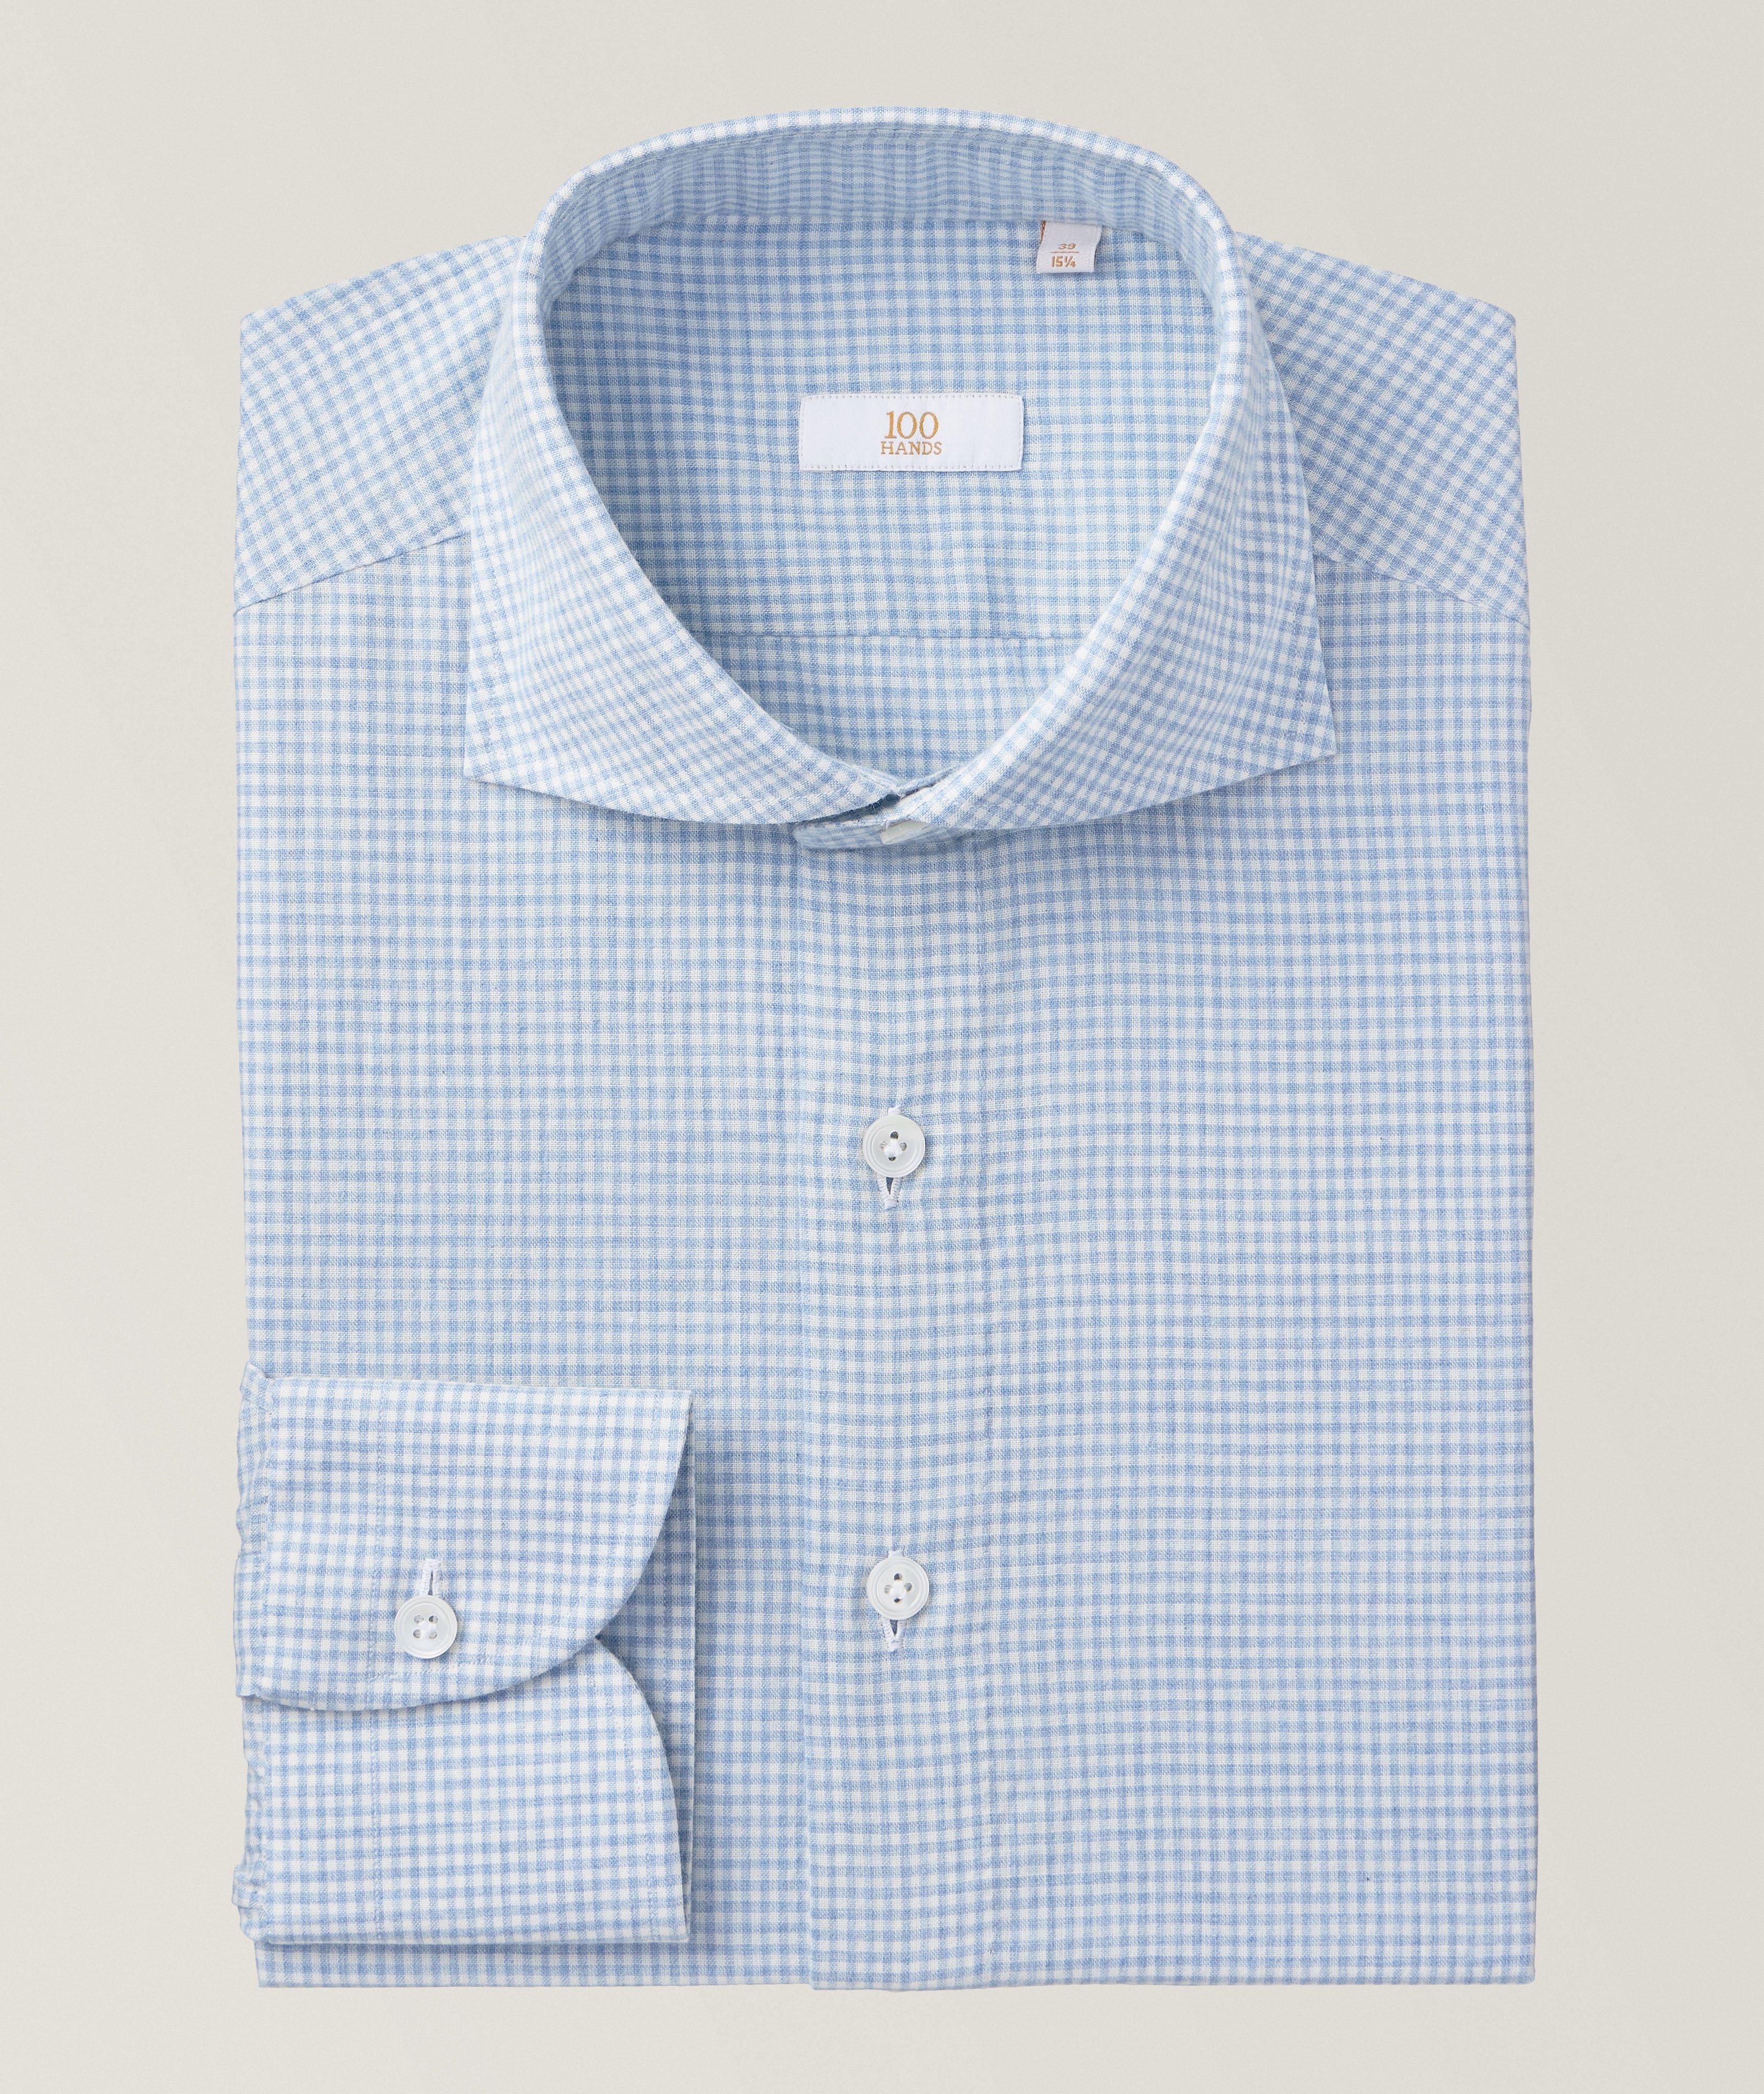 Pure Comfort: 100% Cotton Shirt for Men for Everyday Wear || Casual Wear ||  Formal Wear